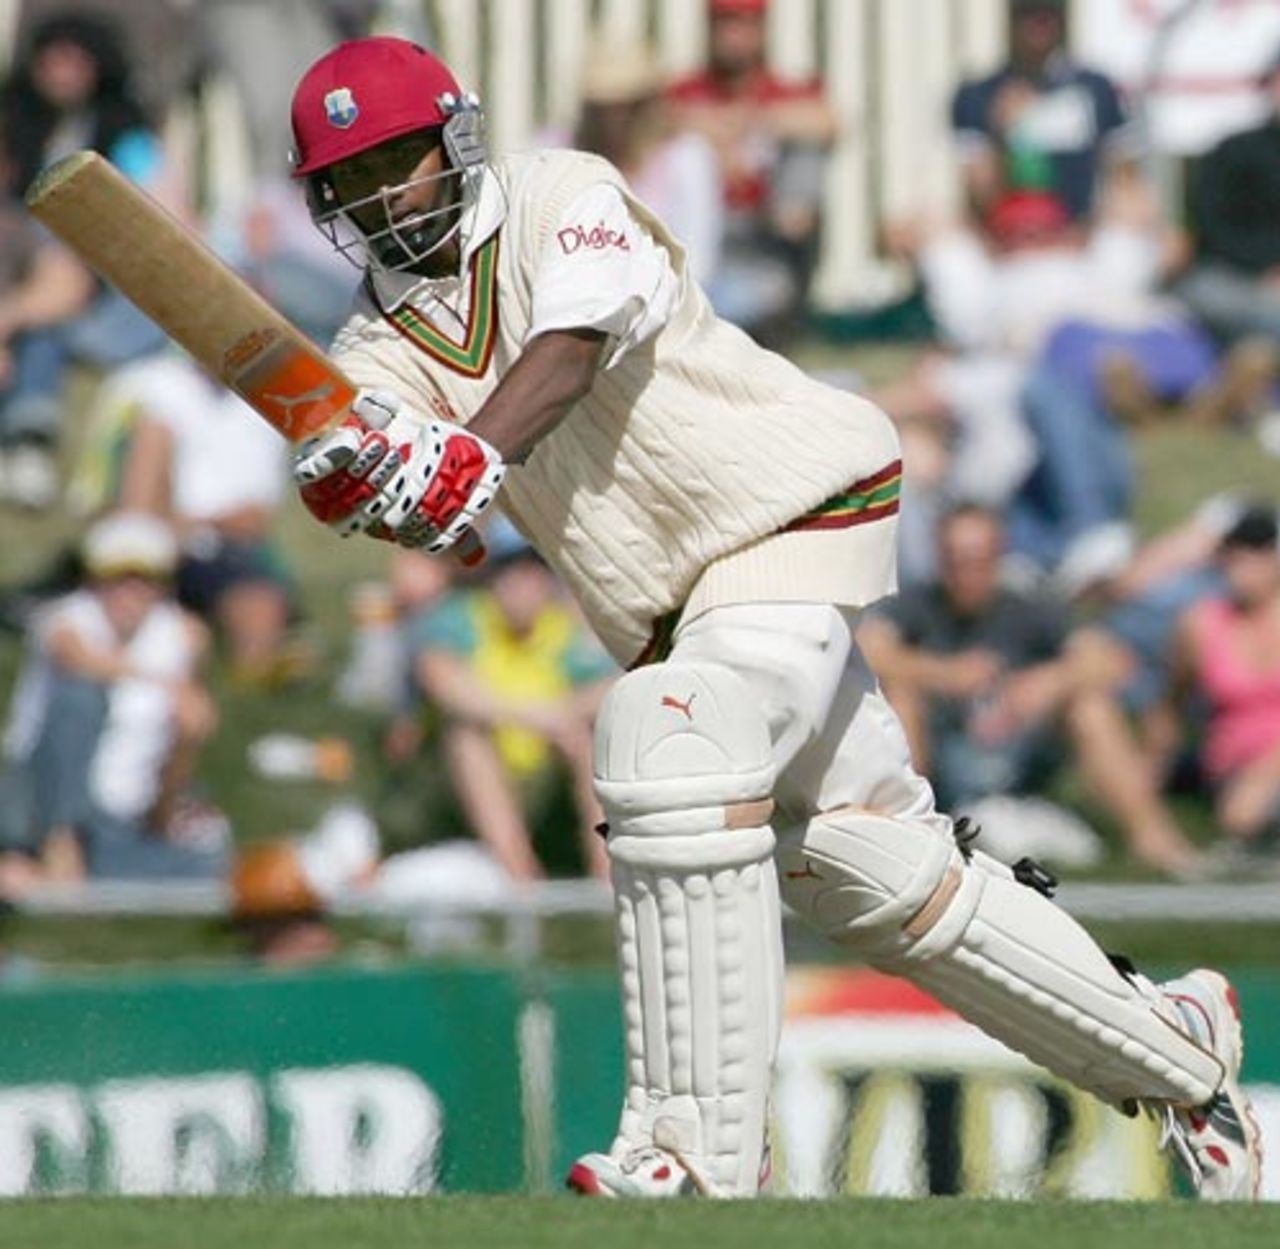 Denesh Ramdin forces one on the leg side on the way to his 71, Australia v West Indies, 2nd Test, Hobart, 4th day, November 20, 2005